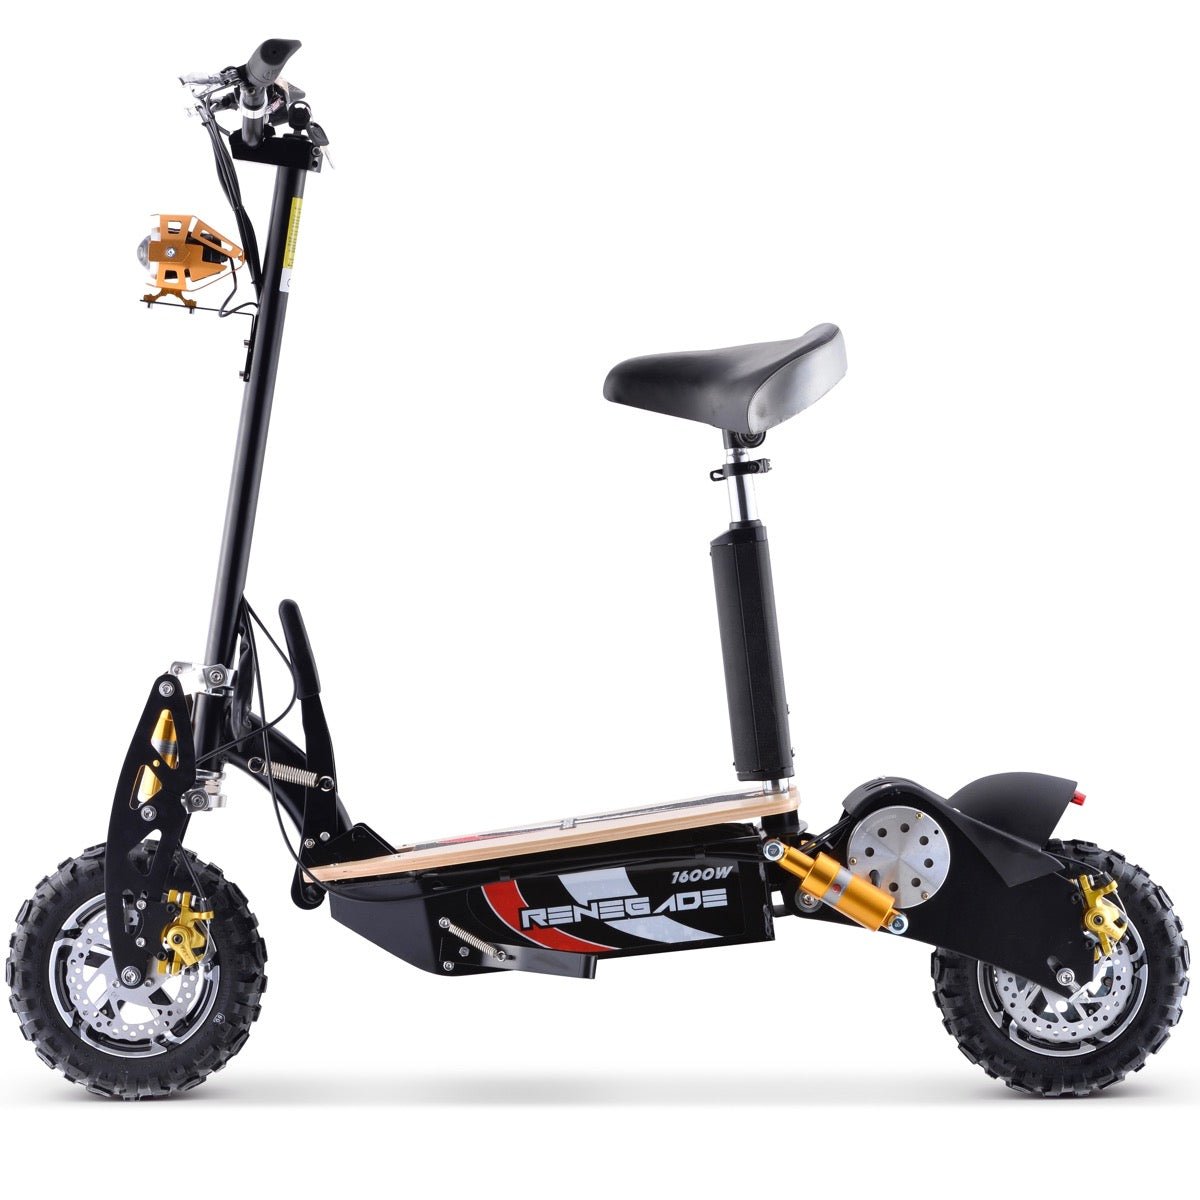 Renegade 1600W Powerboard 48V Electric Scooter - Black